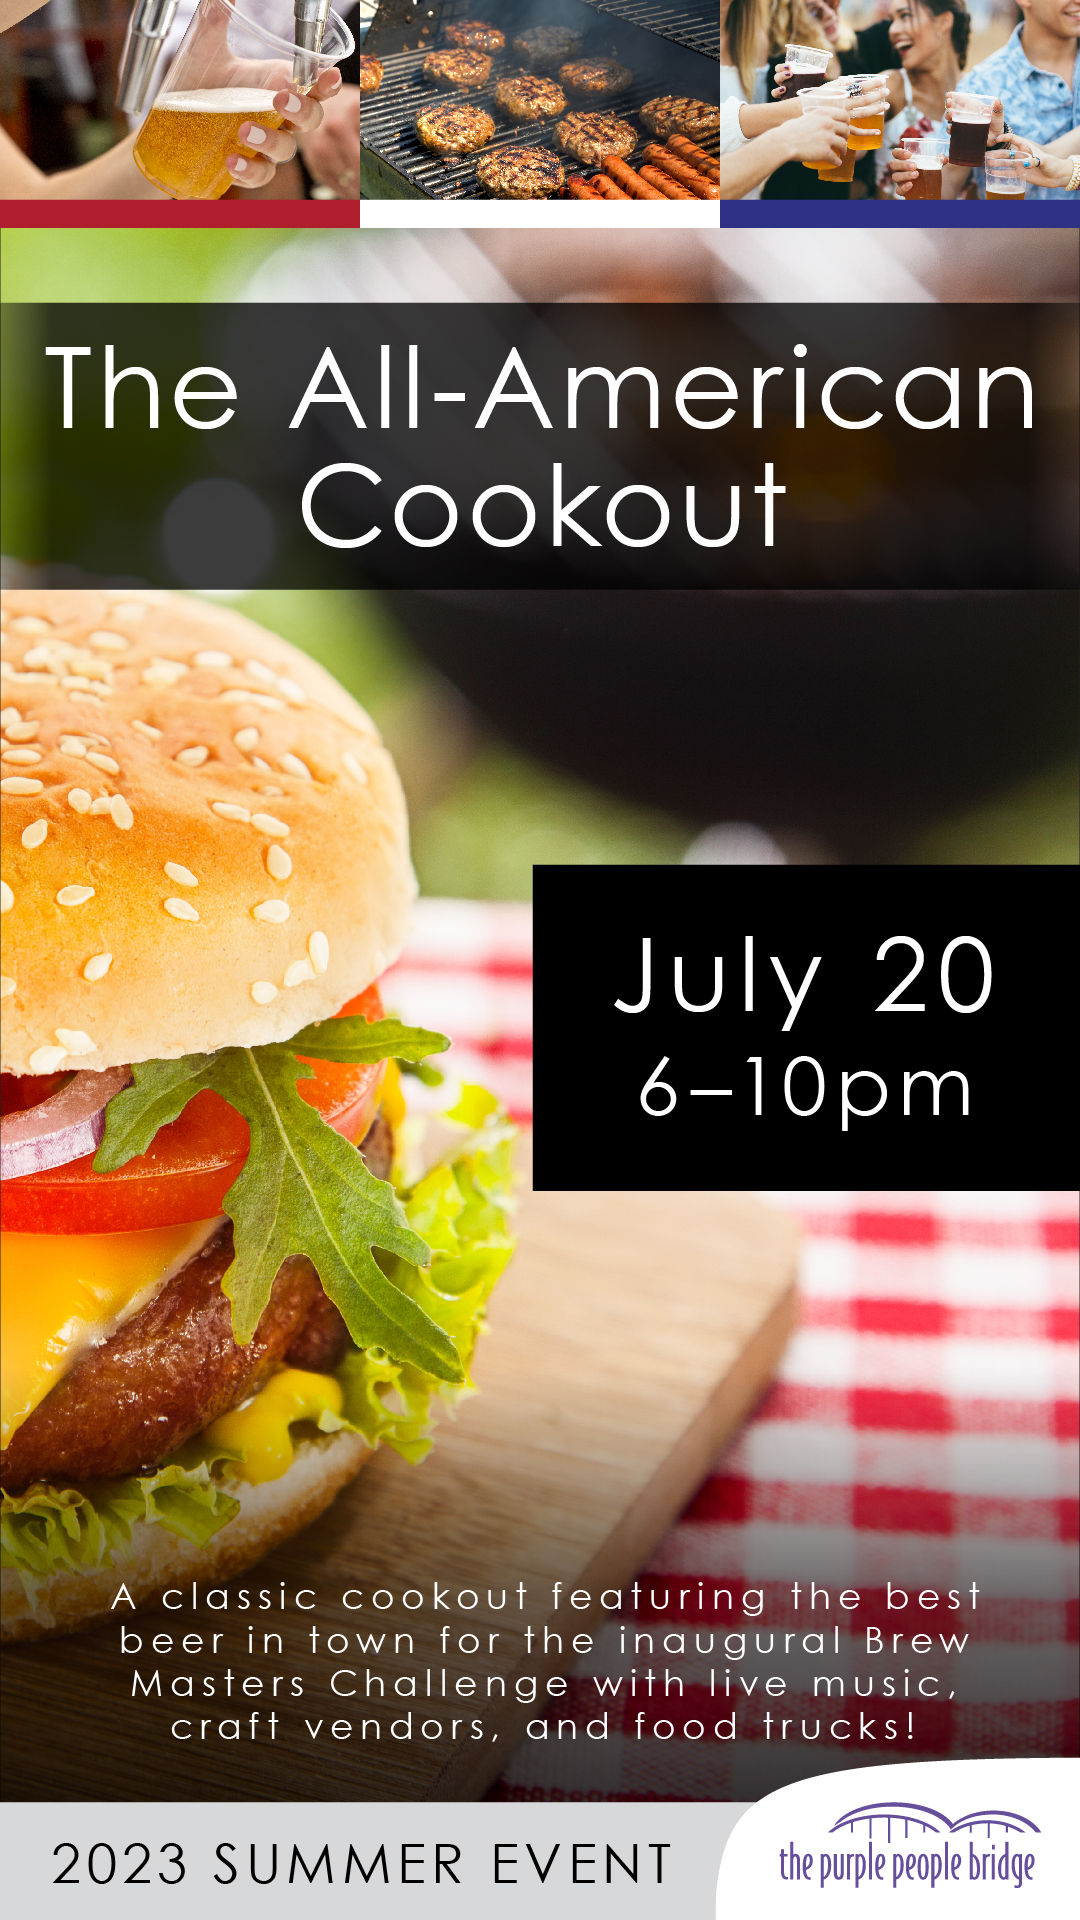 The All-American Cookout | July 20 | 6–10pm | A classic cookout featuring the best beer in town for the inaugural Brew Masters Challenge with live music, craft vendors, and food trucks!